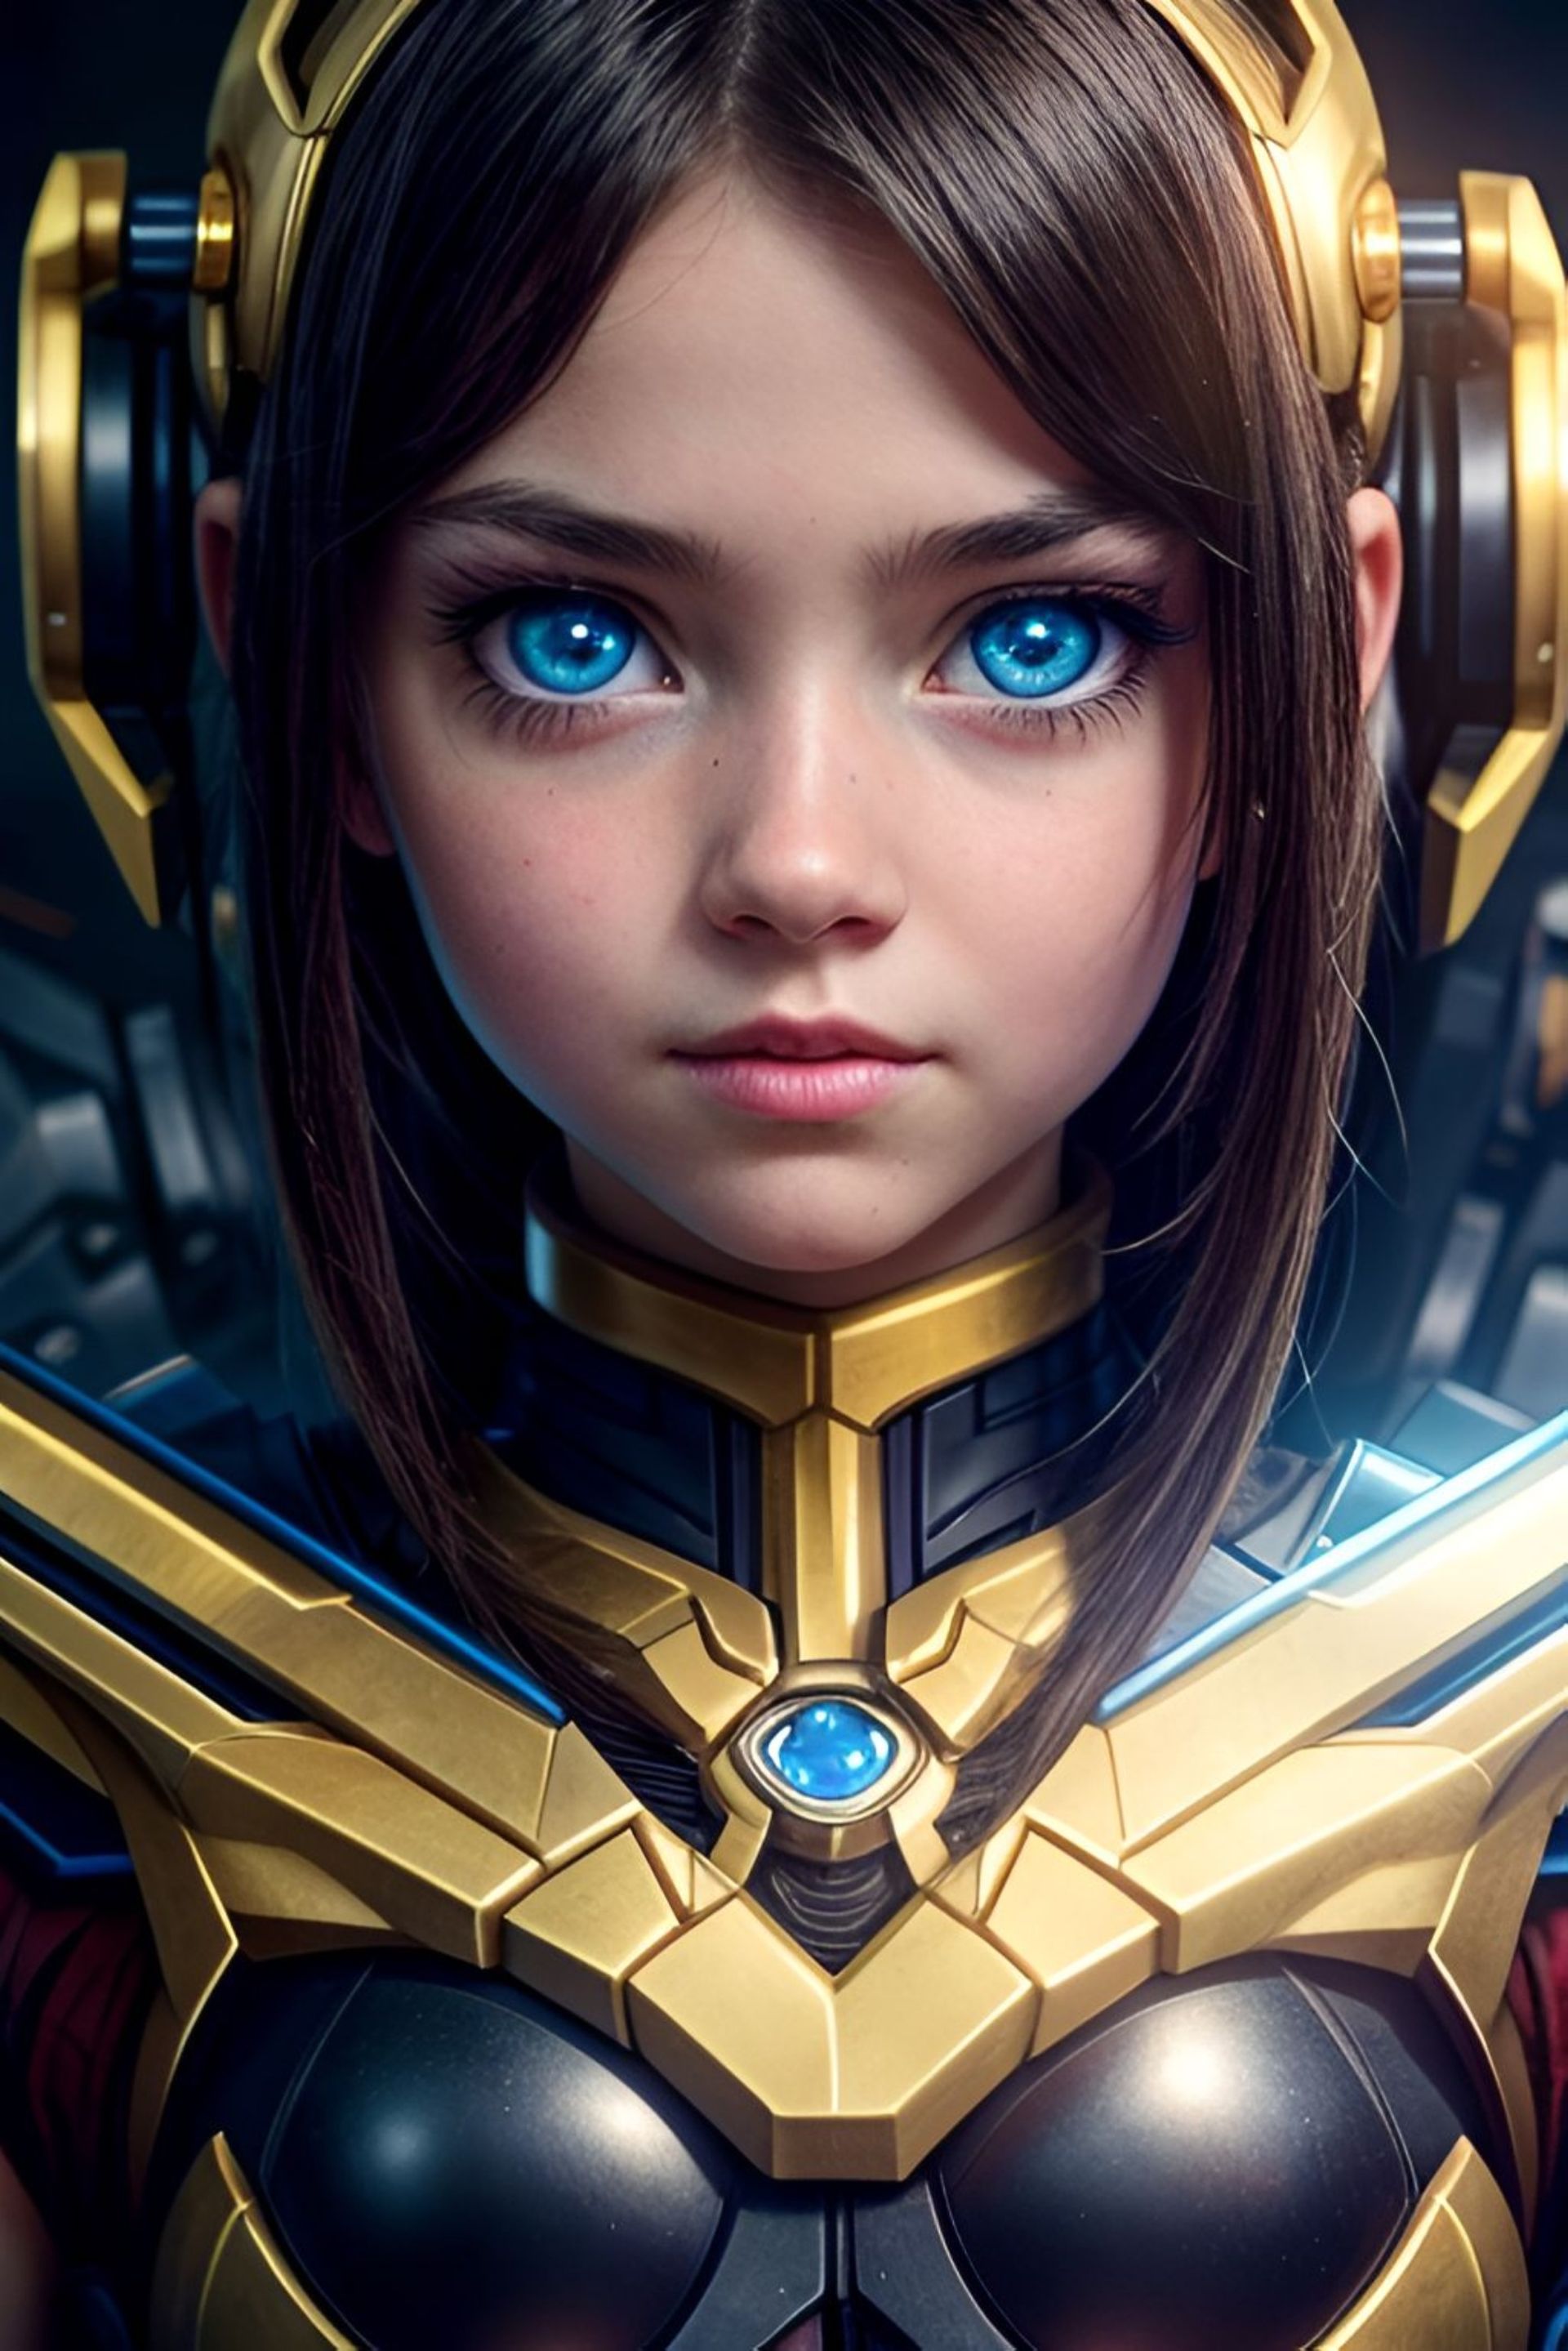 Free photo A girl, a robot, with brown hair and blue eyes.